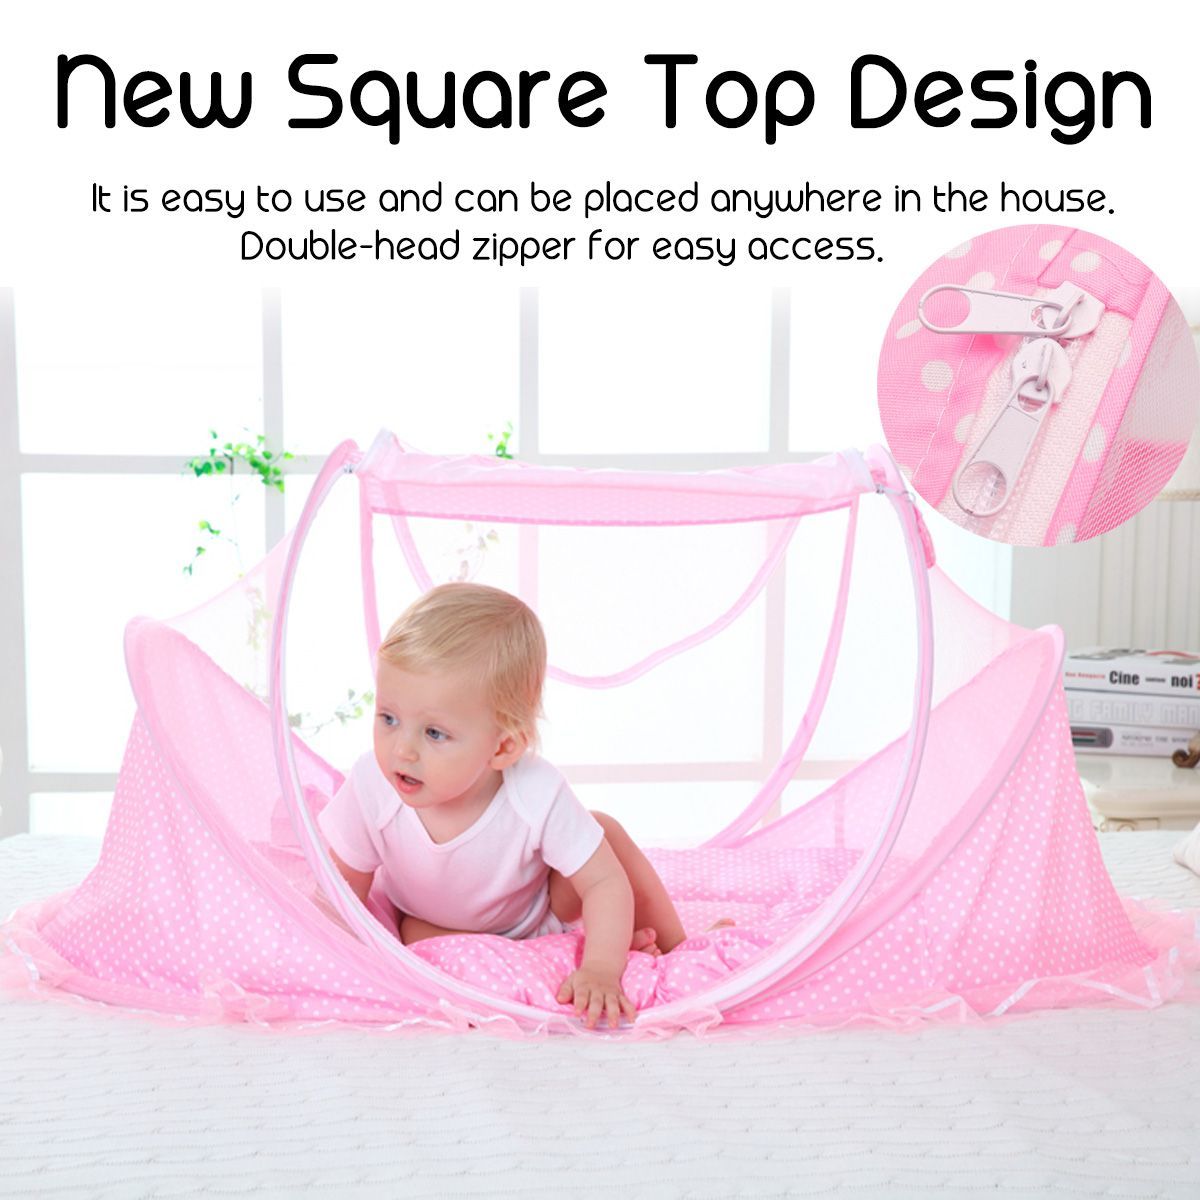 Portable-Folding-Infant-Newborn-Baby-Travel-Anti-Mosquito-Cradle-Bed-Tent-1633484